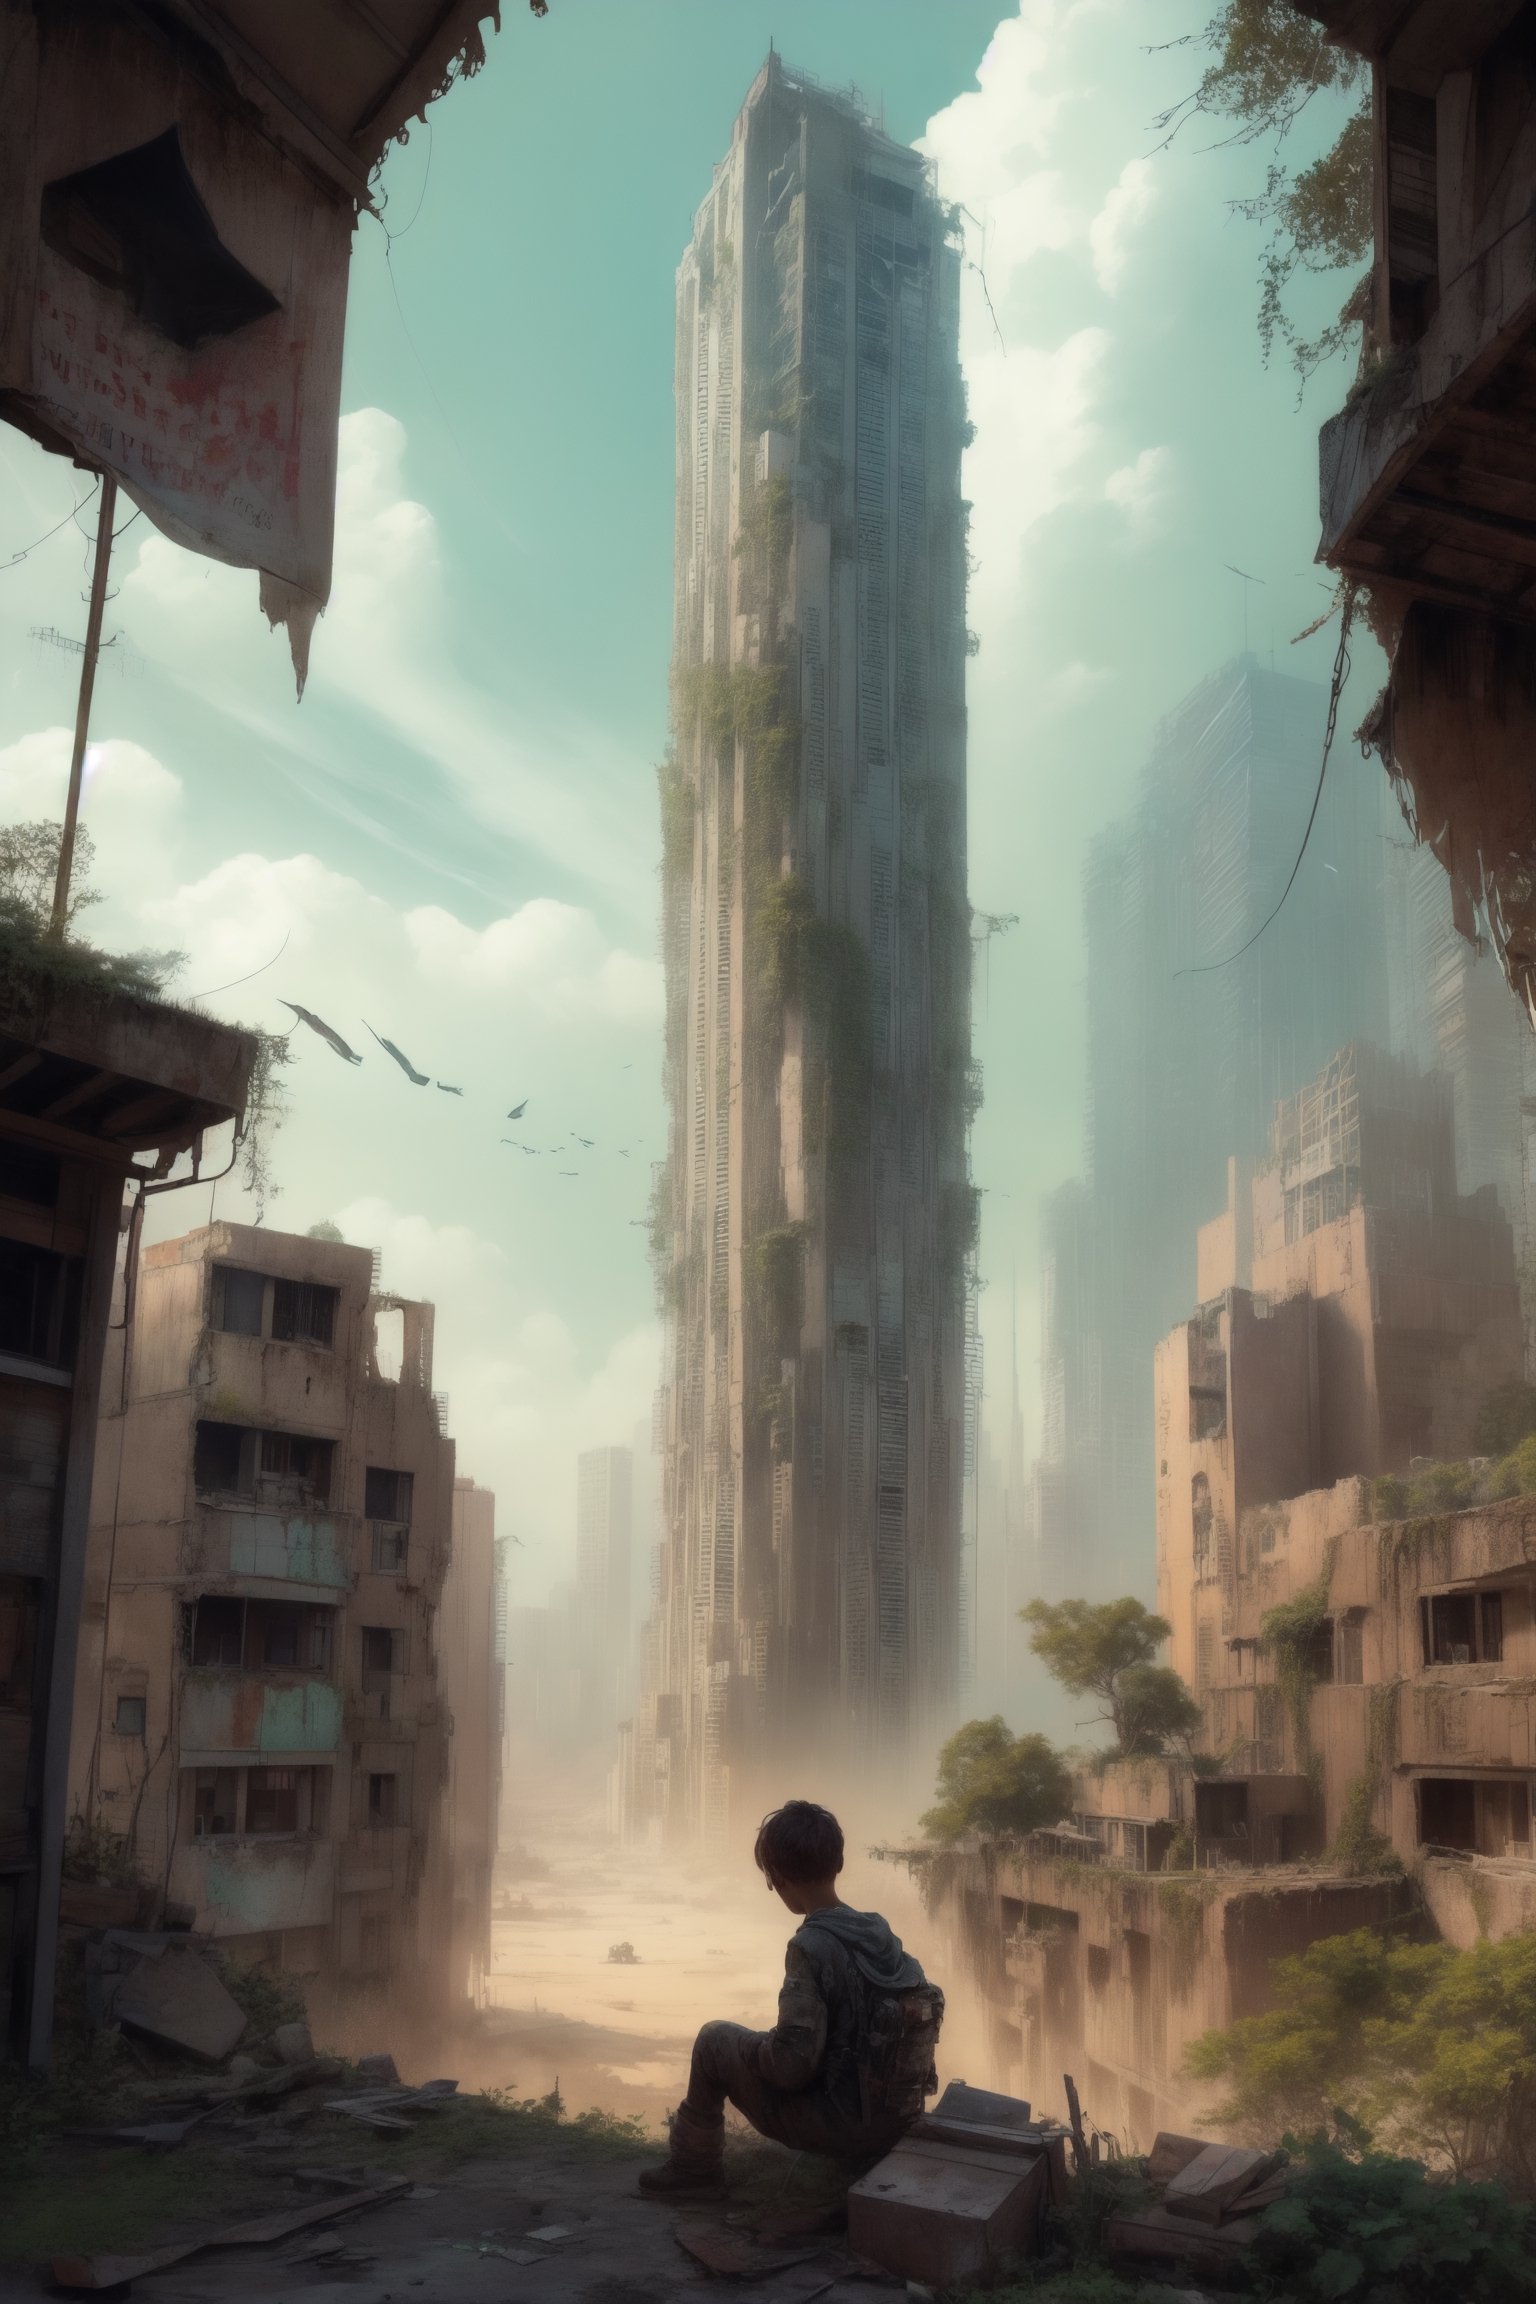 An evocative painting depicting a post-apocalyptic landscape where nature has reclaimed the remnants of human civilization. In the foreground, a child sits amidst the ruins, their small frame juxtaposed against the towering remnants of skyscrapers now overgrown with vines and foliage. The soft hues of dawn illuminate the scene, casting a sense of hope amidst the desolation.